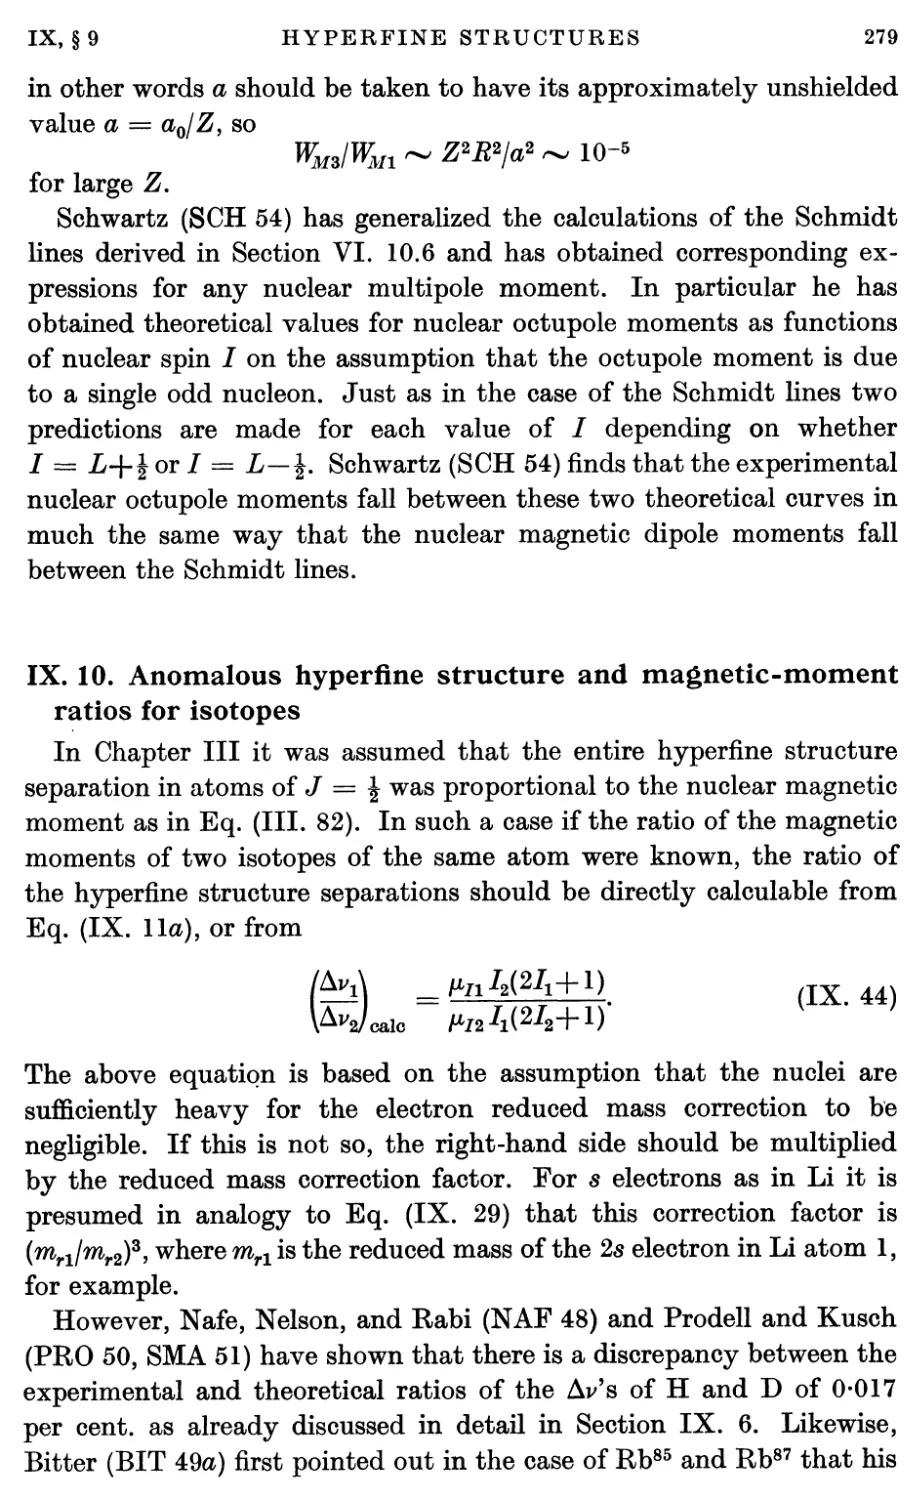 IX.10. Anomalous Hyperfine Structure and Magnetic-moment Ratios for Isotopes